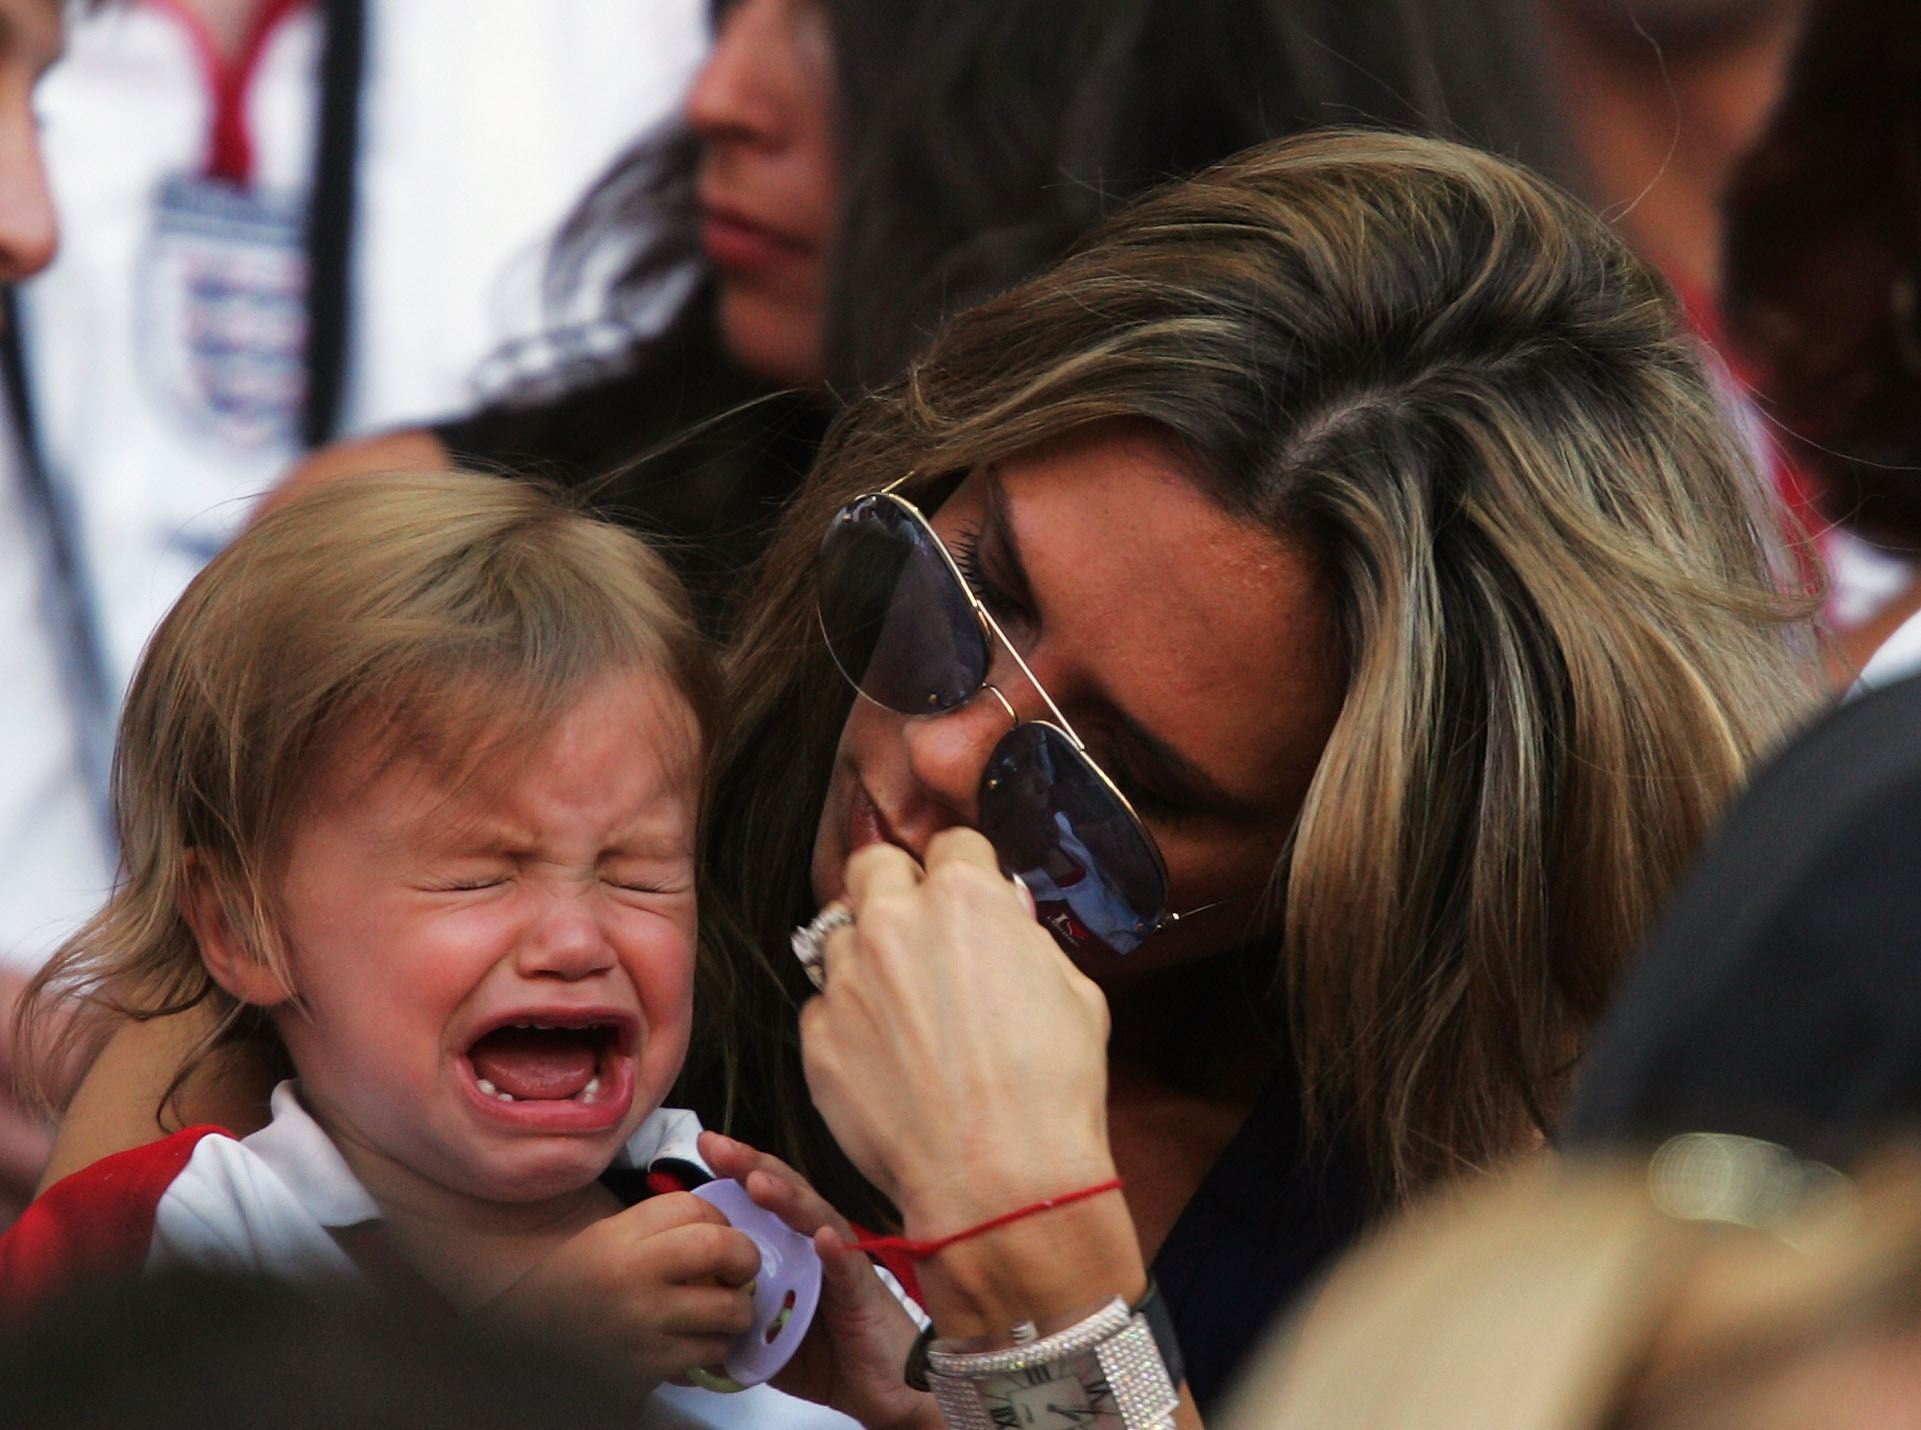 Romeo Beckham consoled by his mom in Lisbon, Portugal on June 13, 2004 | Source: Getty Images